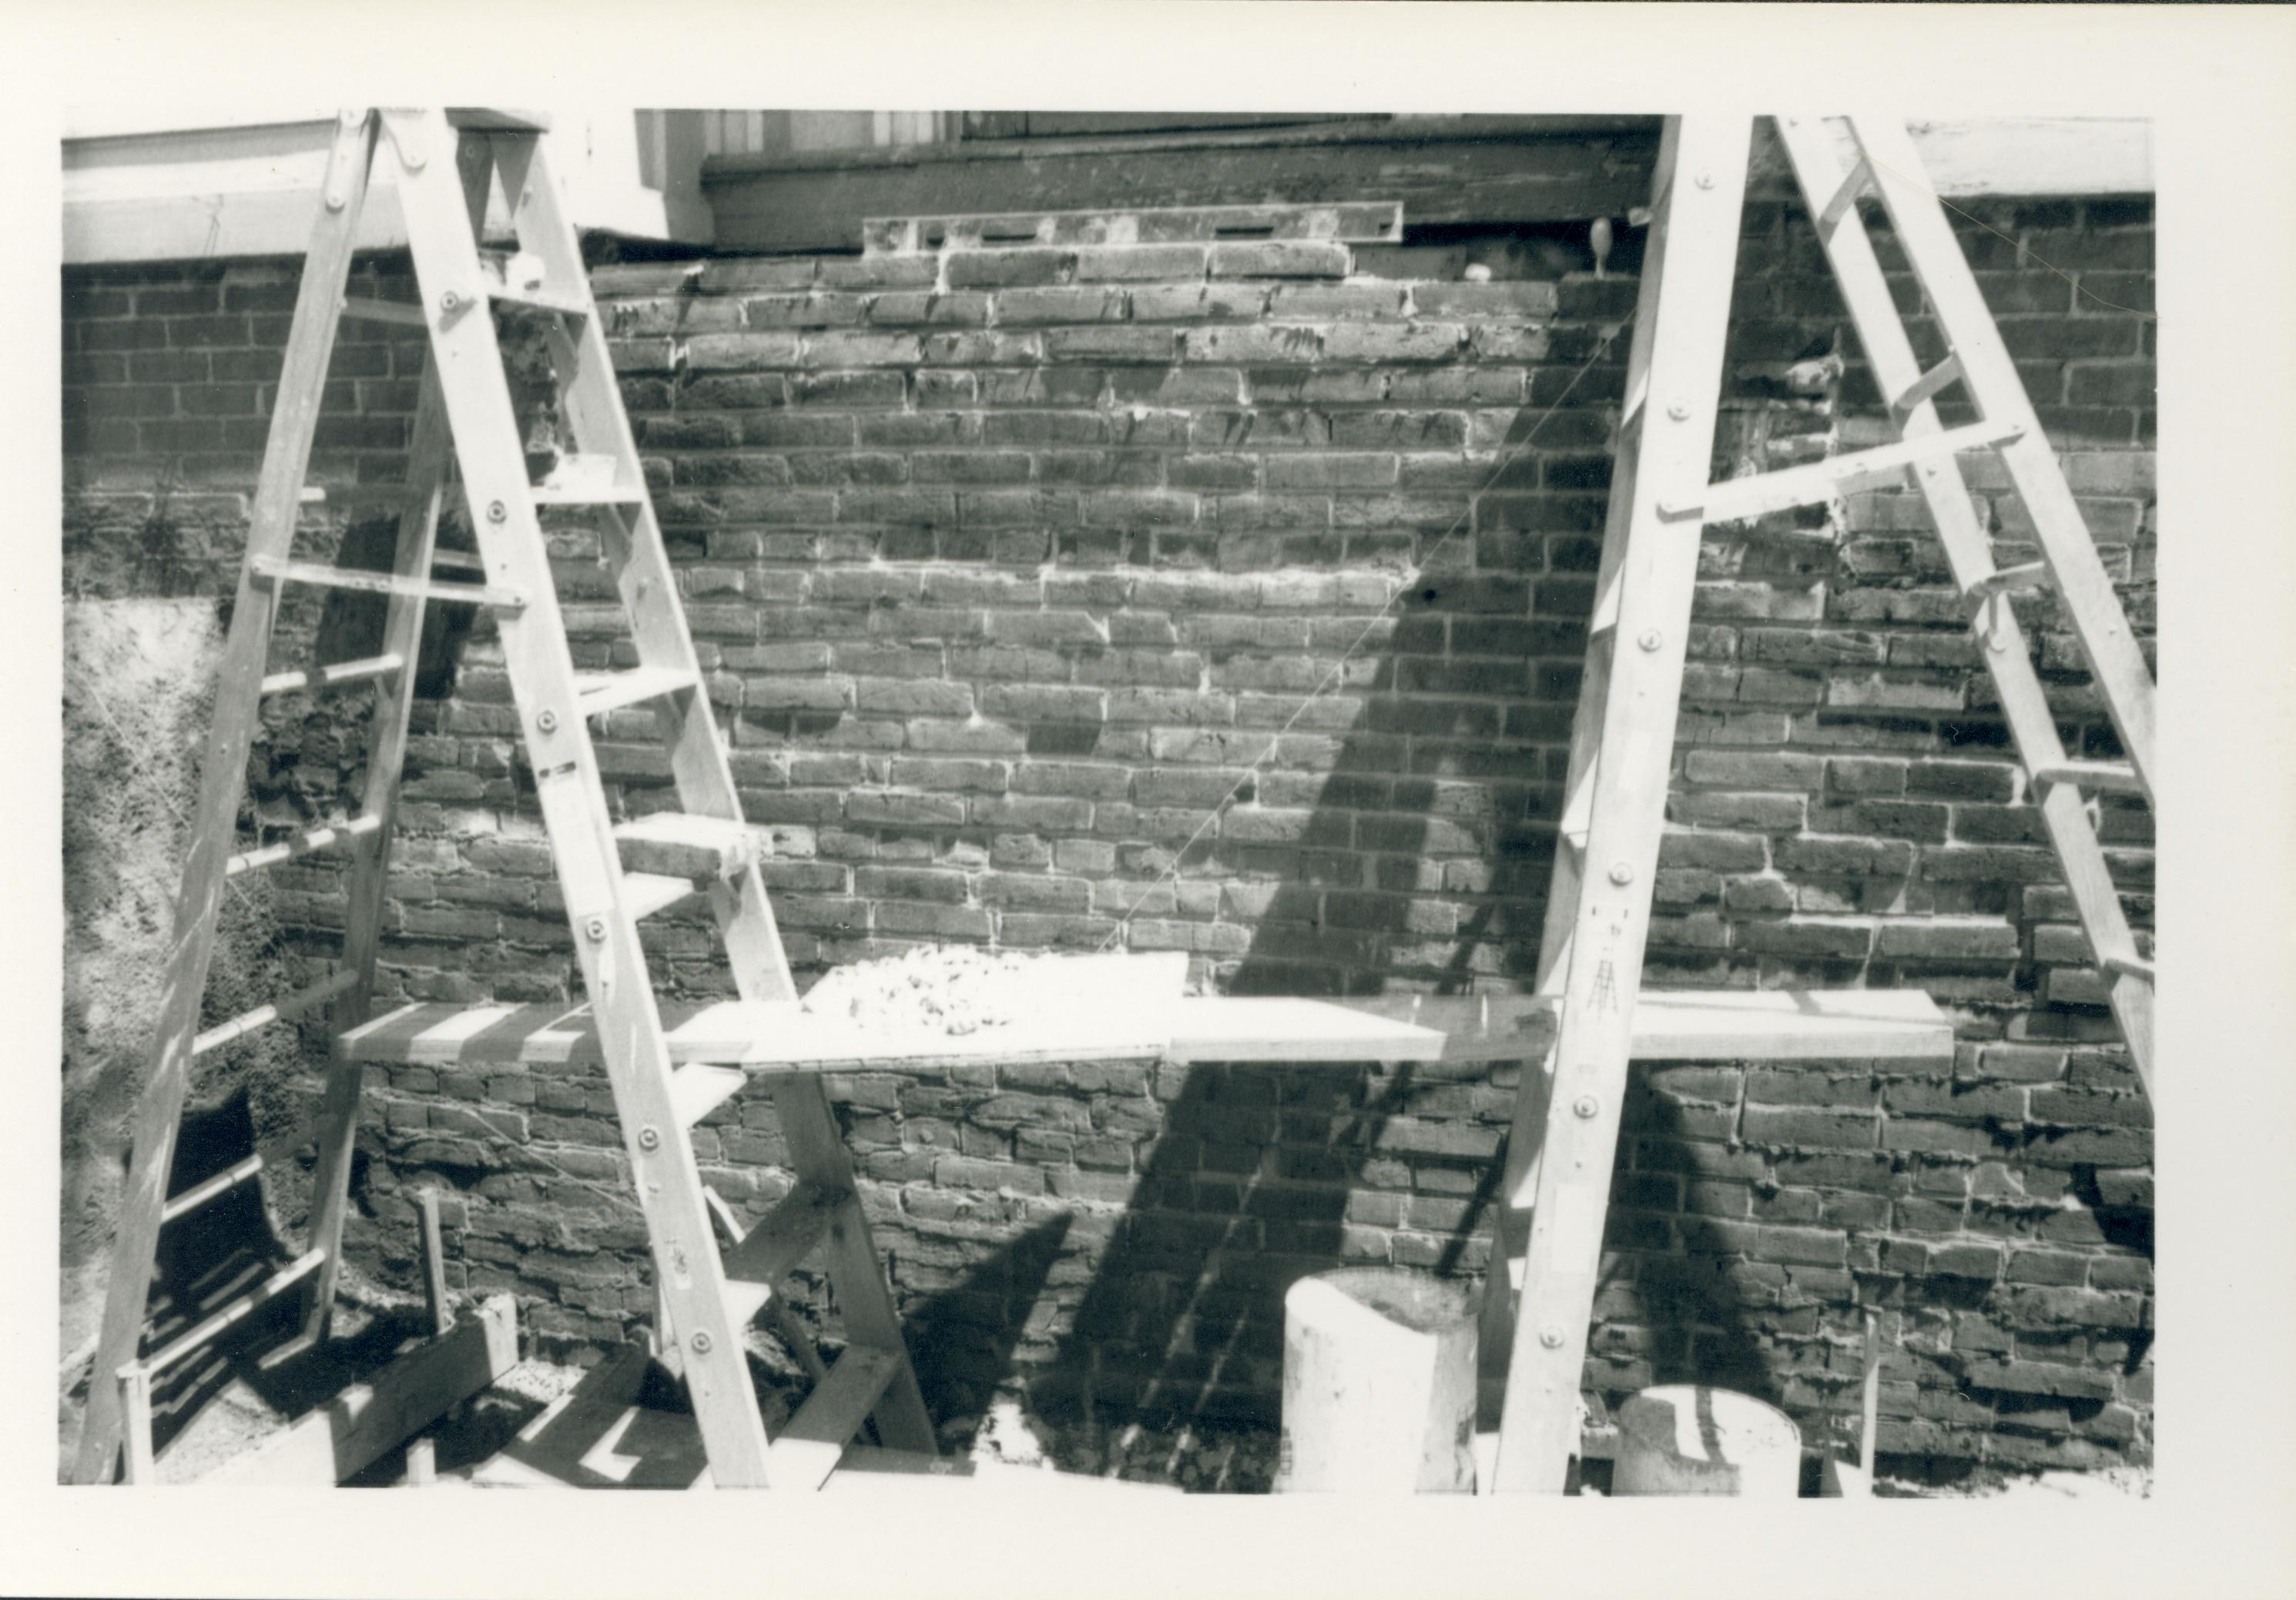 Two ladders in a trench alongside an exposed section of the Lincoln Home foundation during the 1987-1988 restoration. The west entrance to the Lincoln Home can be seen at top.